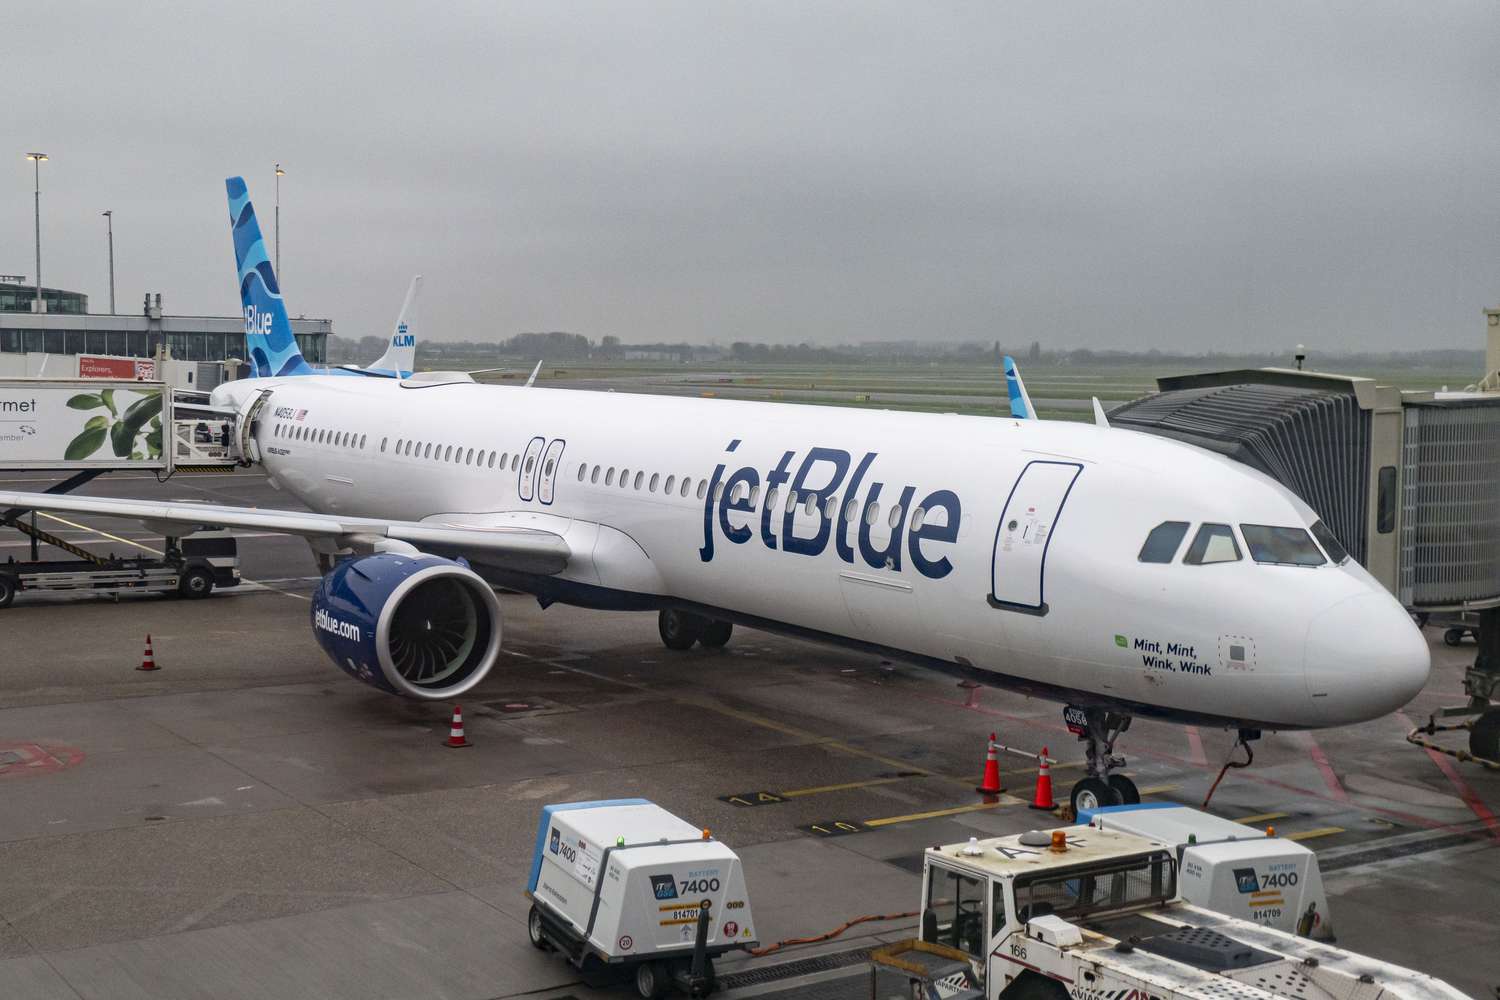 JetBlue Stock Tumbles After Revenue Warning, Lowered Guidance [Video]